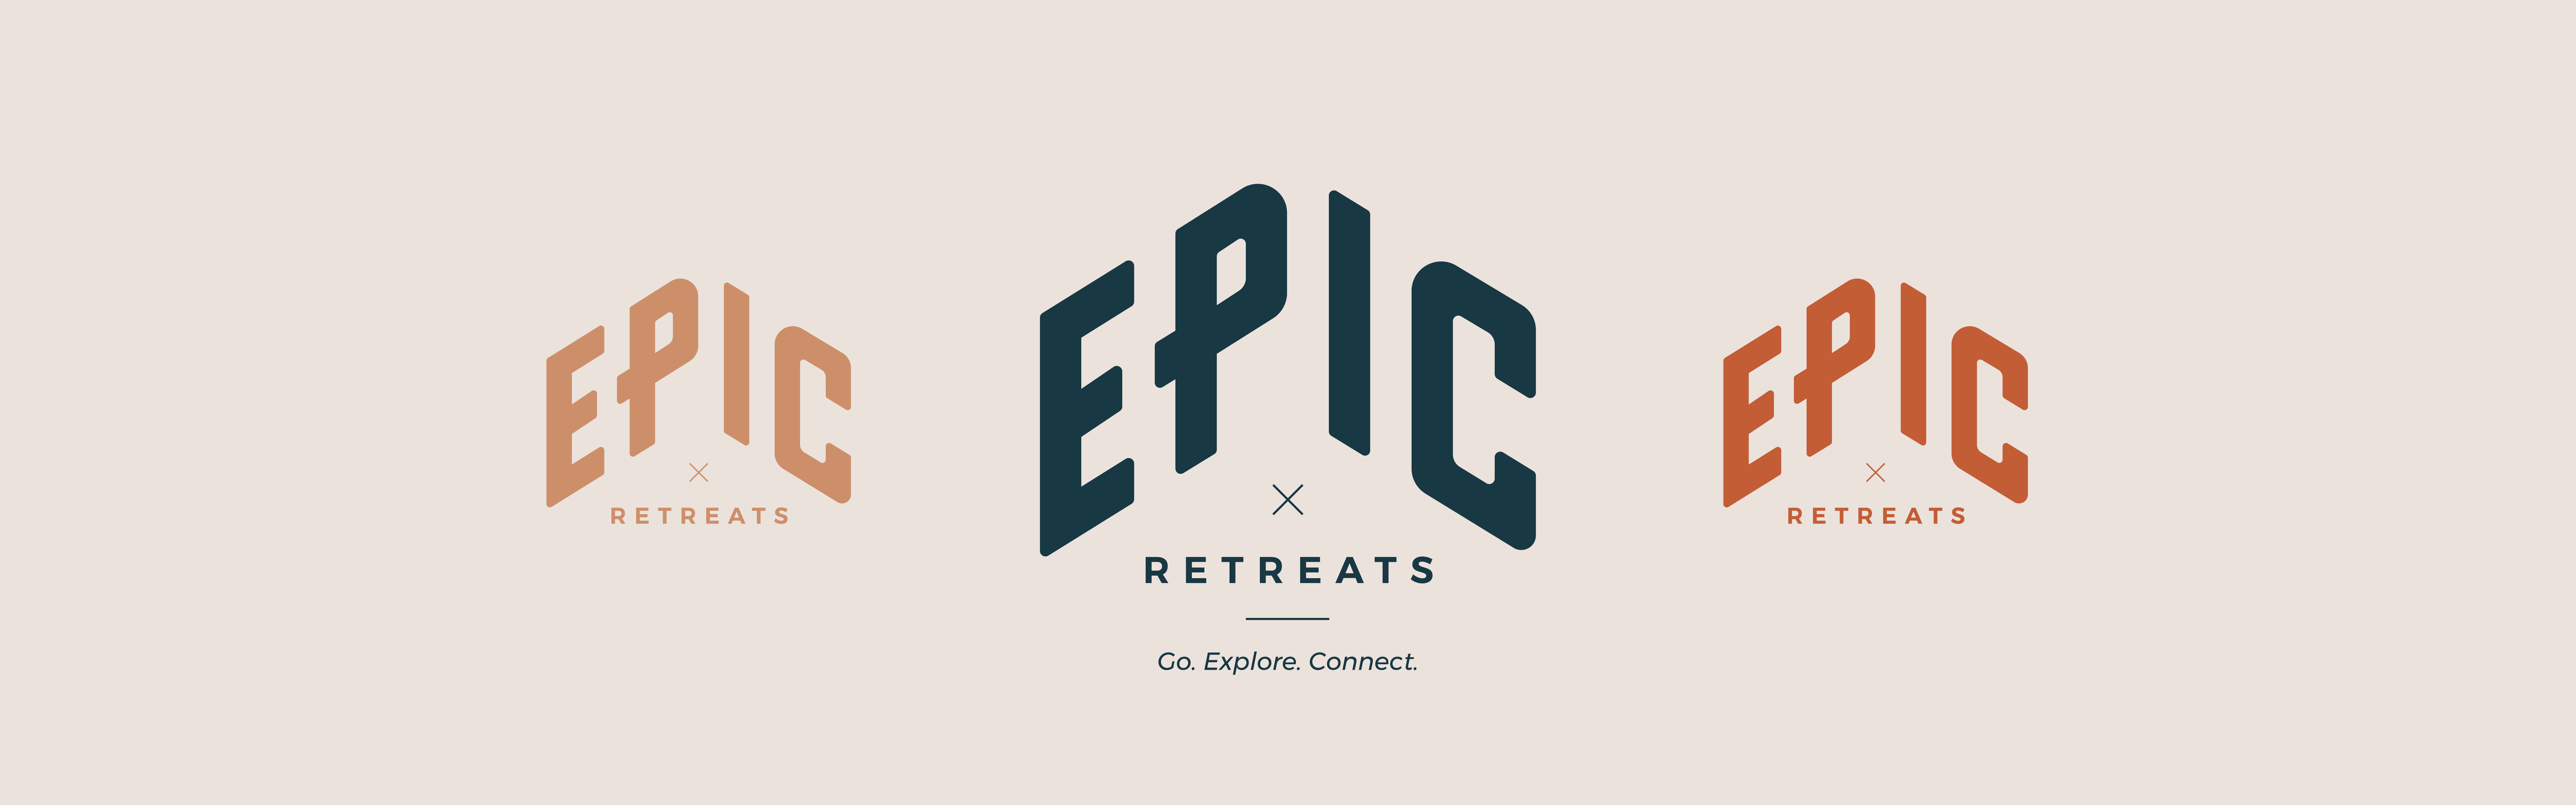 The image displays a series of logos with the words "Epic Retreats" in large, bold letters; "Epic" is more prominent, followed by "Retreats" in a smaller